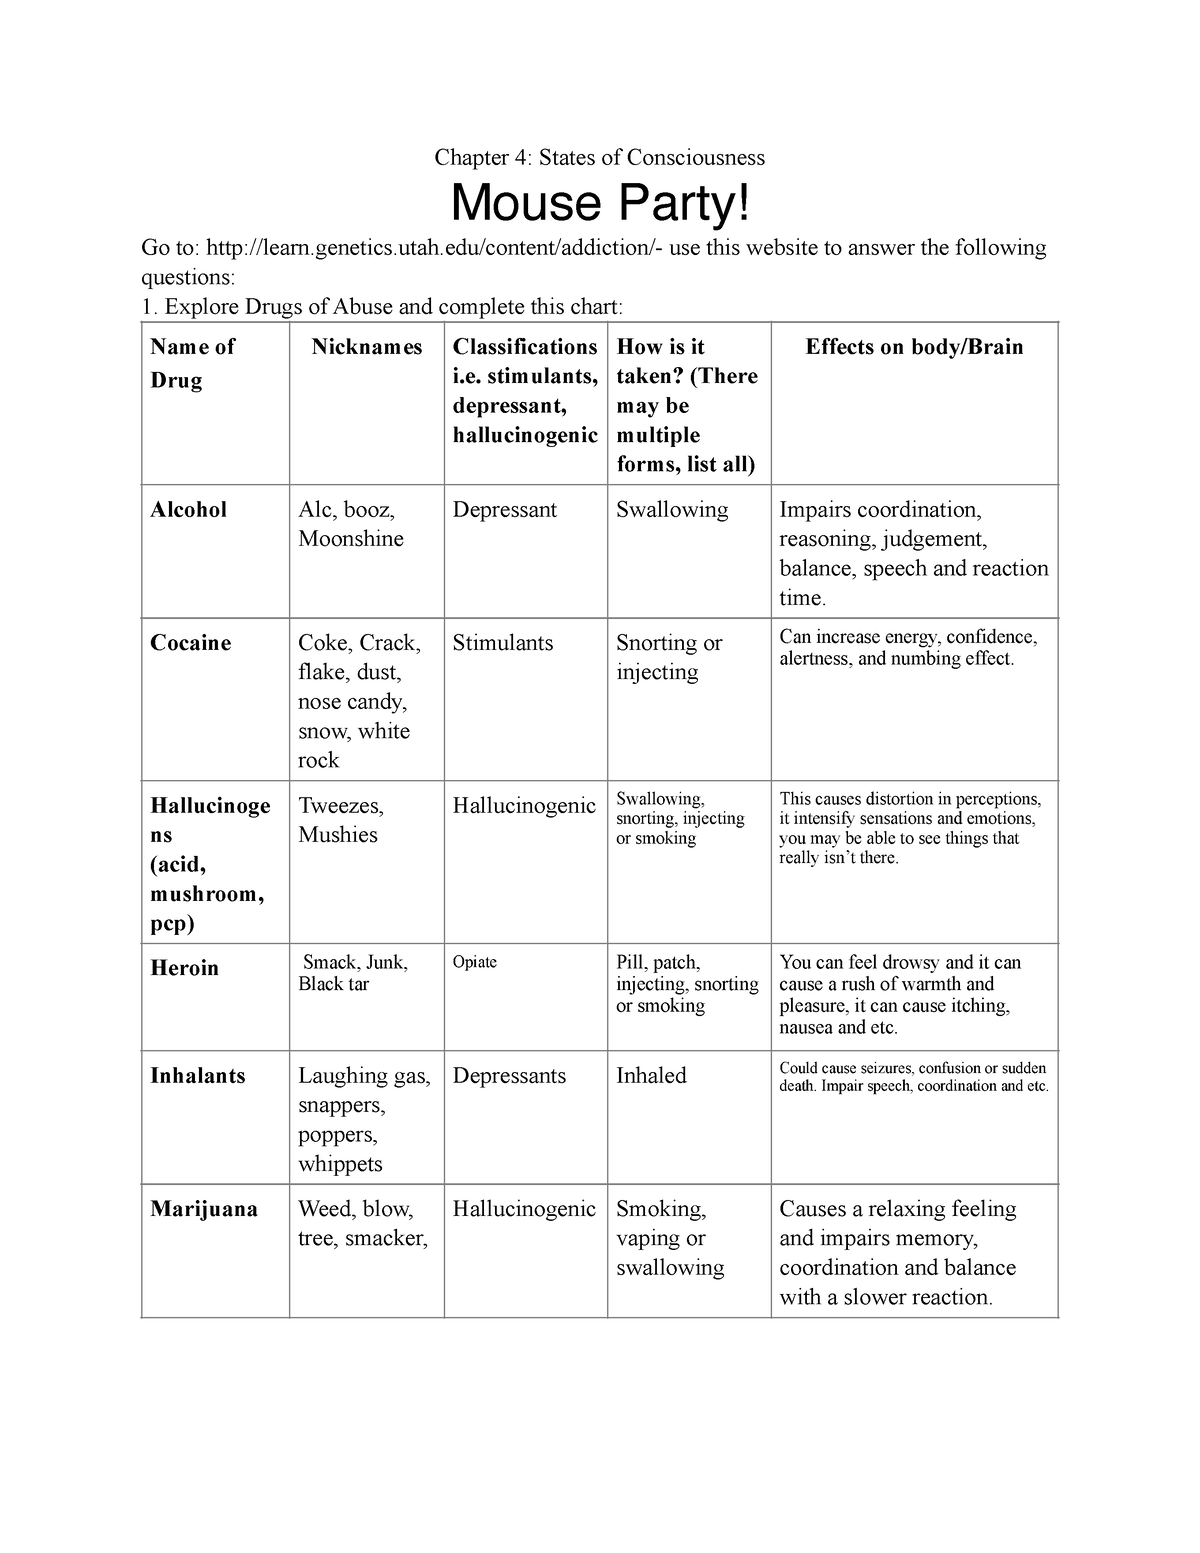 General Psychology Mouse Party Copy Chapter 4 States Of Consciousness Mouse Party Go To 